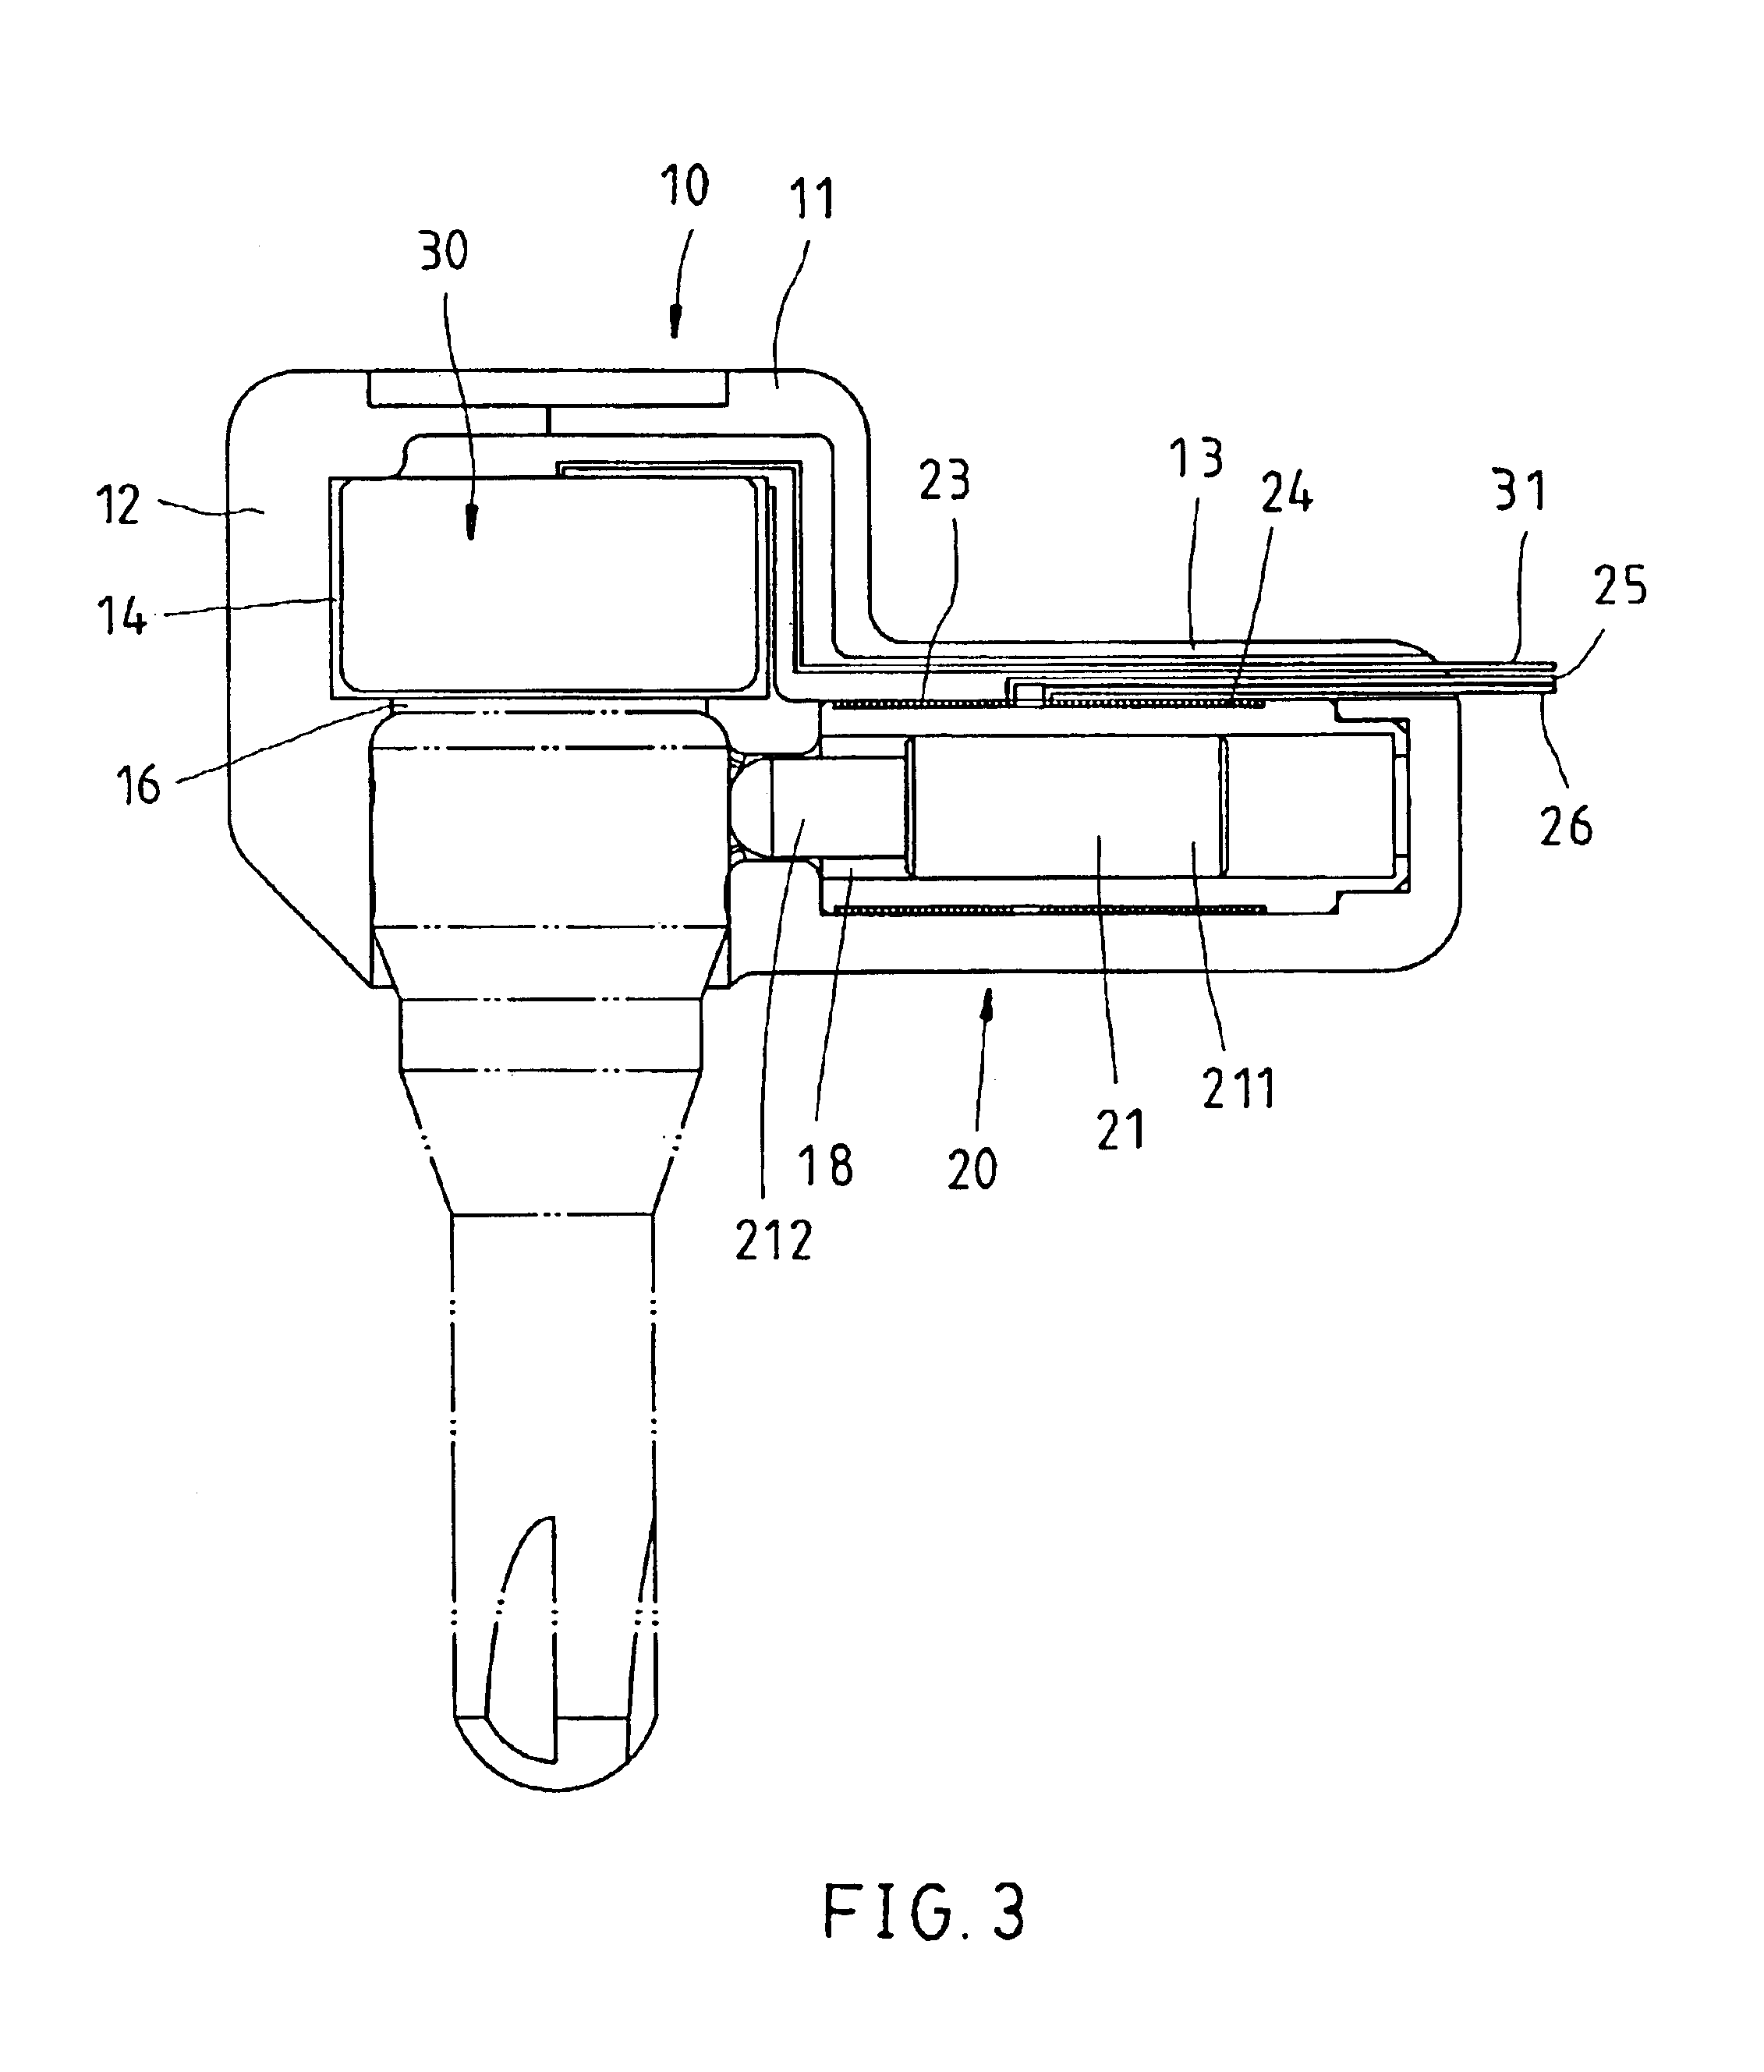 Apparatus for detecting the stability of a tooth in the gum or an implant in the body